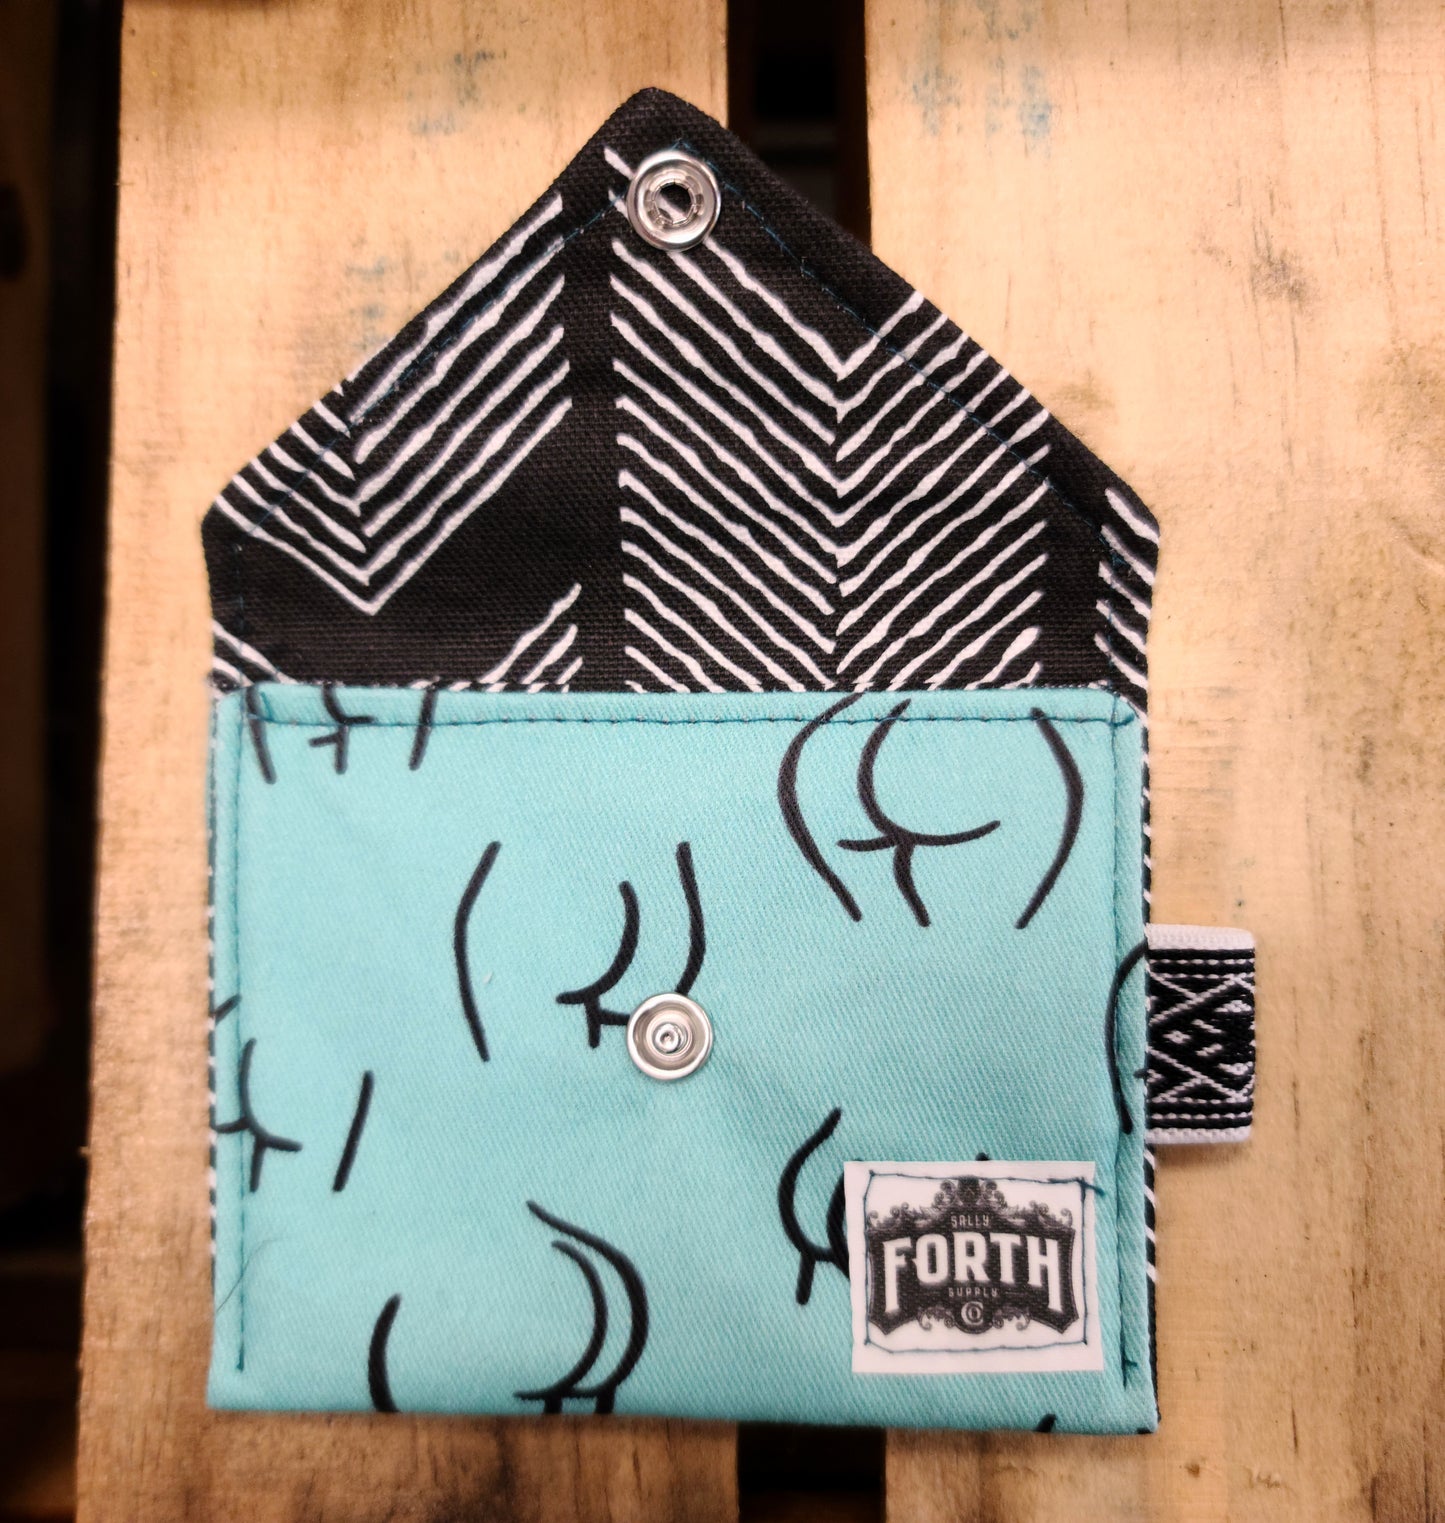 The Original Chapstick Wallet! The Avail: Bum - Sally Forth Supply Co.